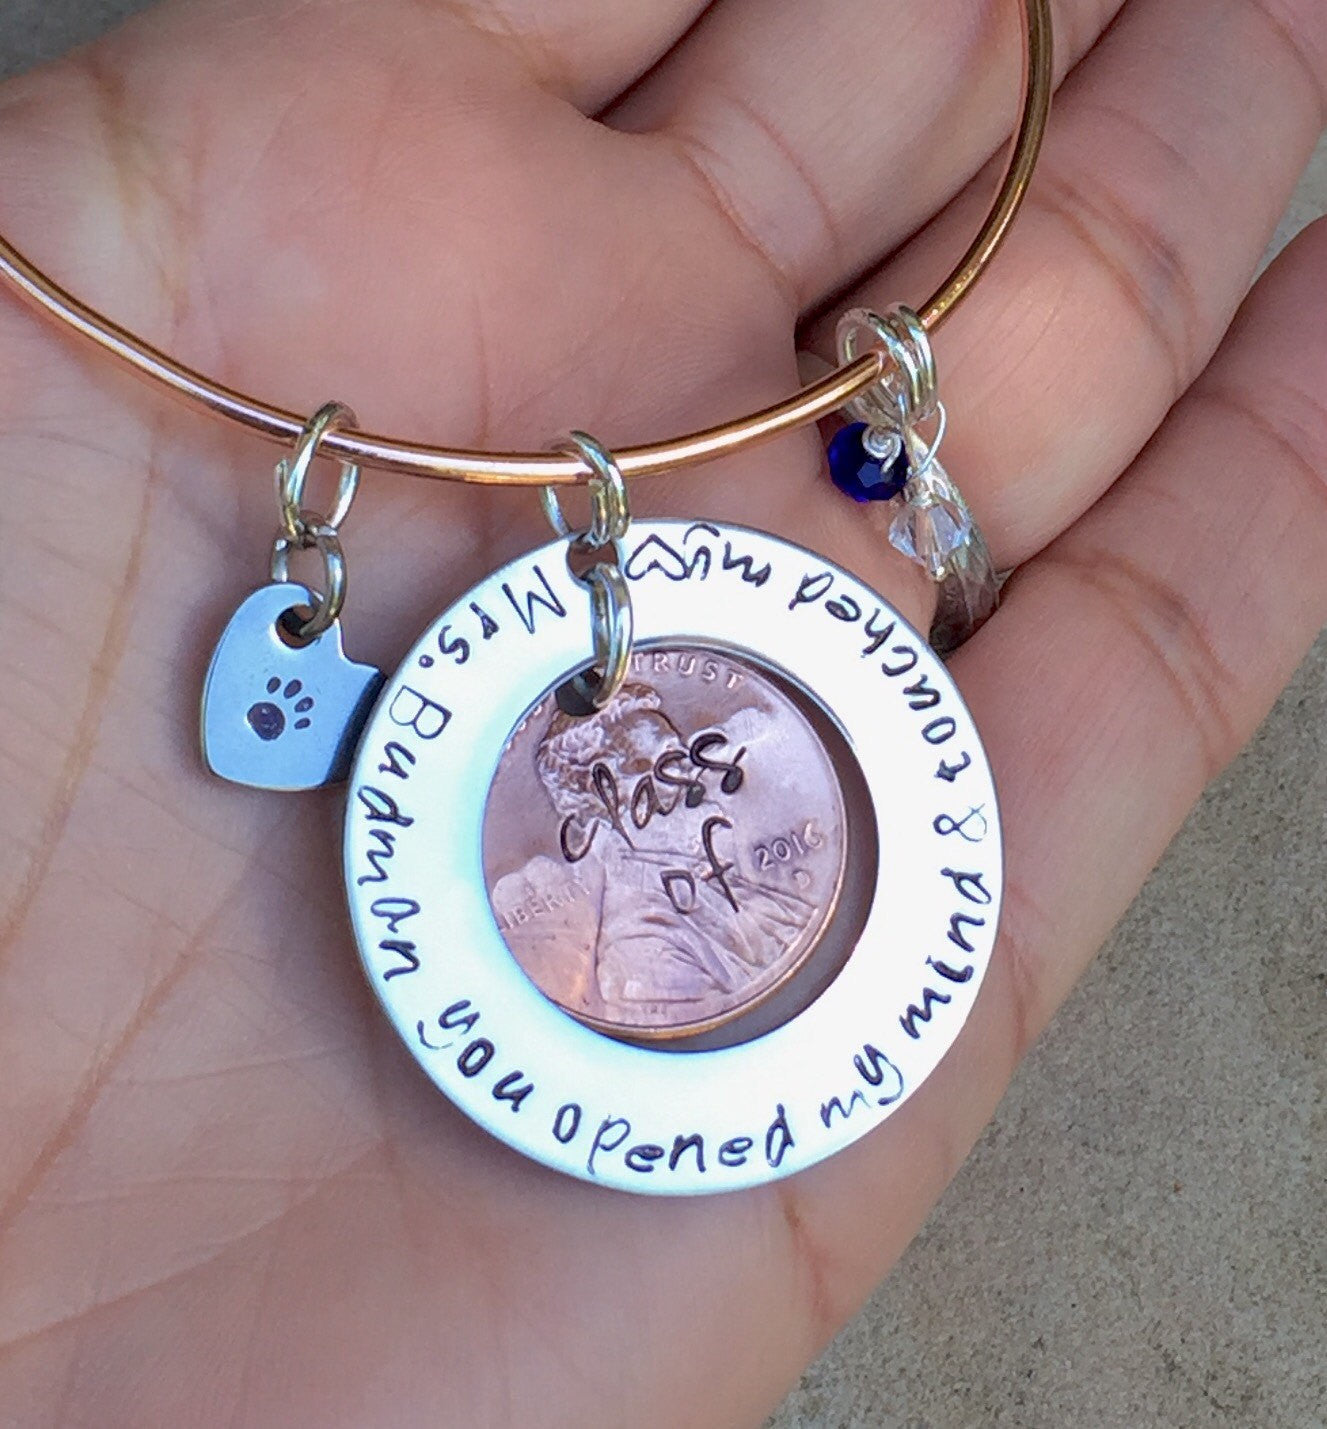 Teacher Gifts, Teacher Bracelet, Teacher Thank You Gifts - Natashaaloha, jewelry, bracelets, necklace, keychains, fishing lures, gifts for men, charms, personalized, 